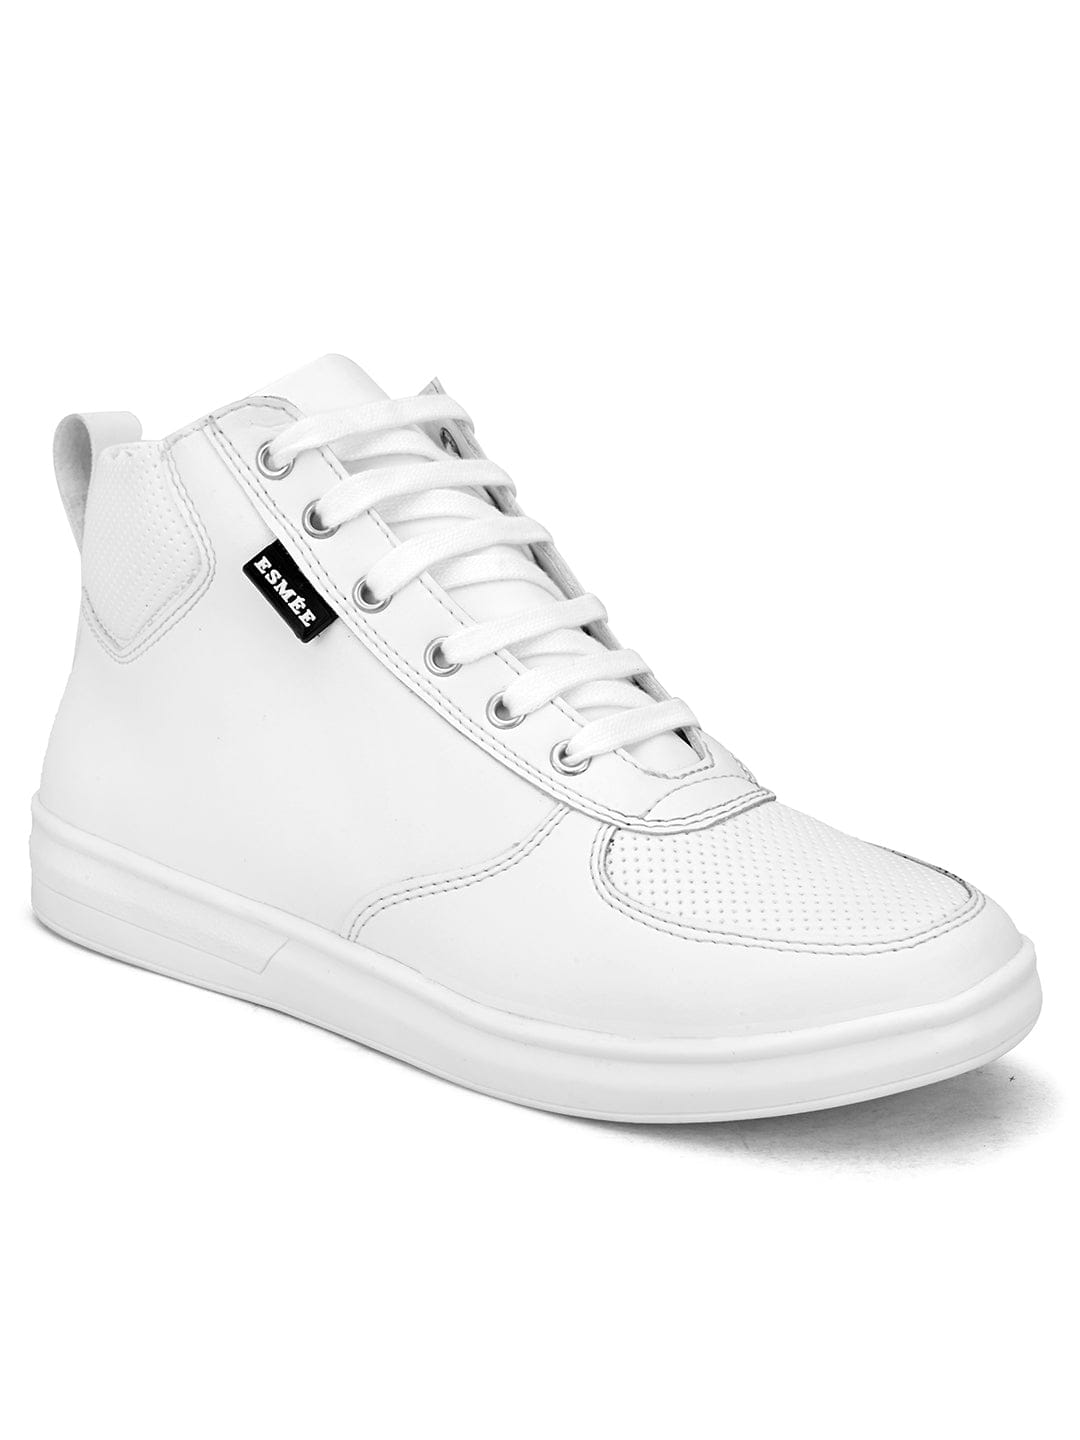 ESMEE Lace Up Ankle Sporty Sneakers